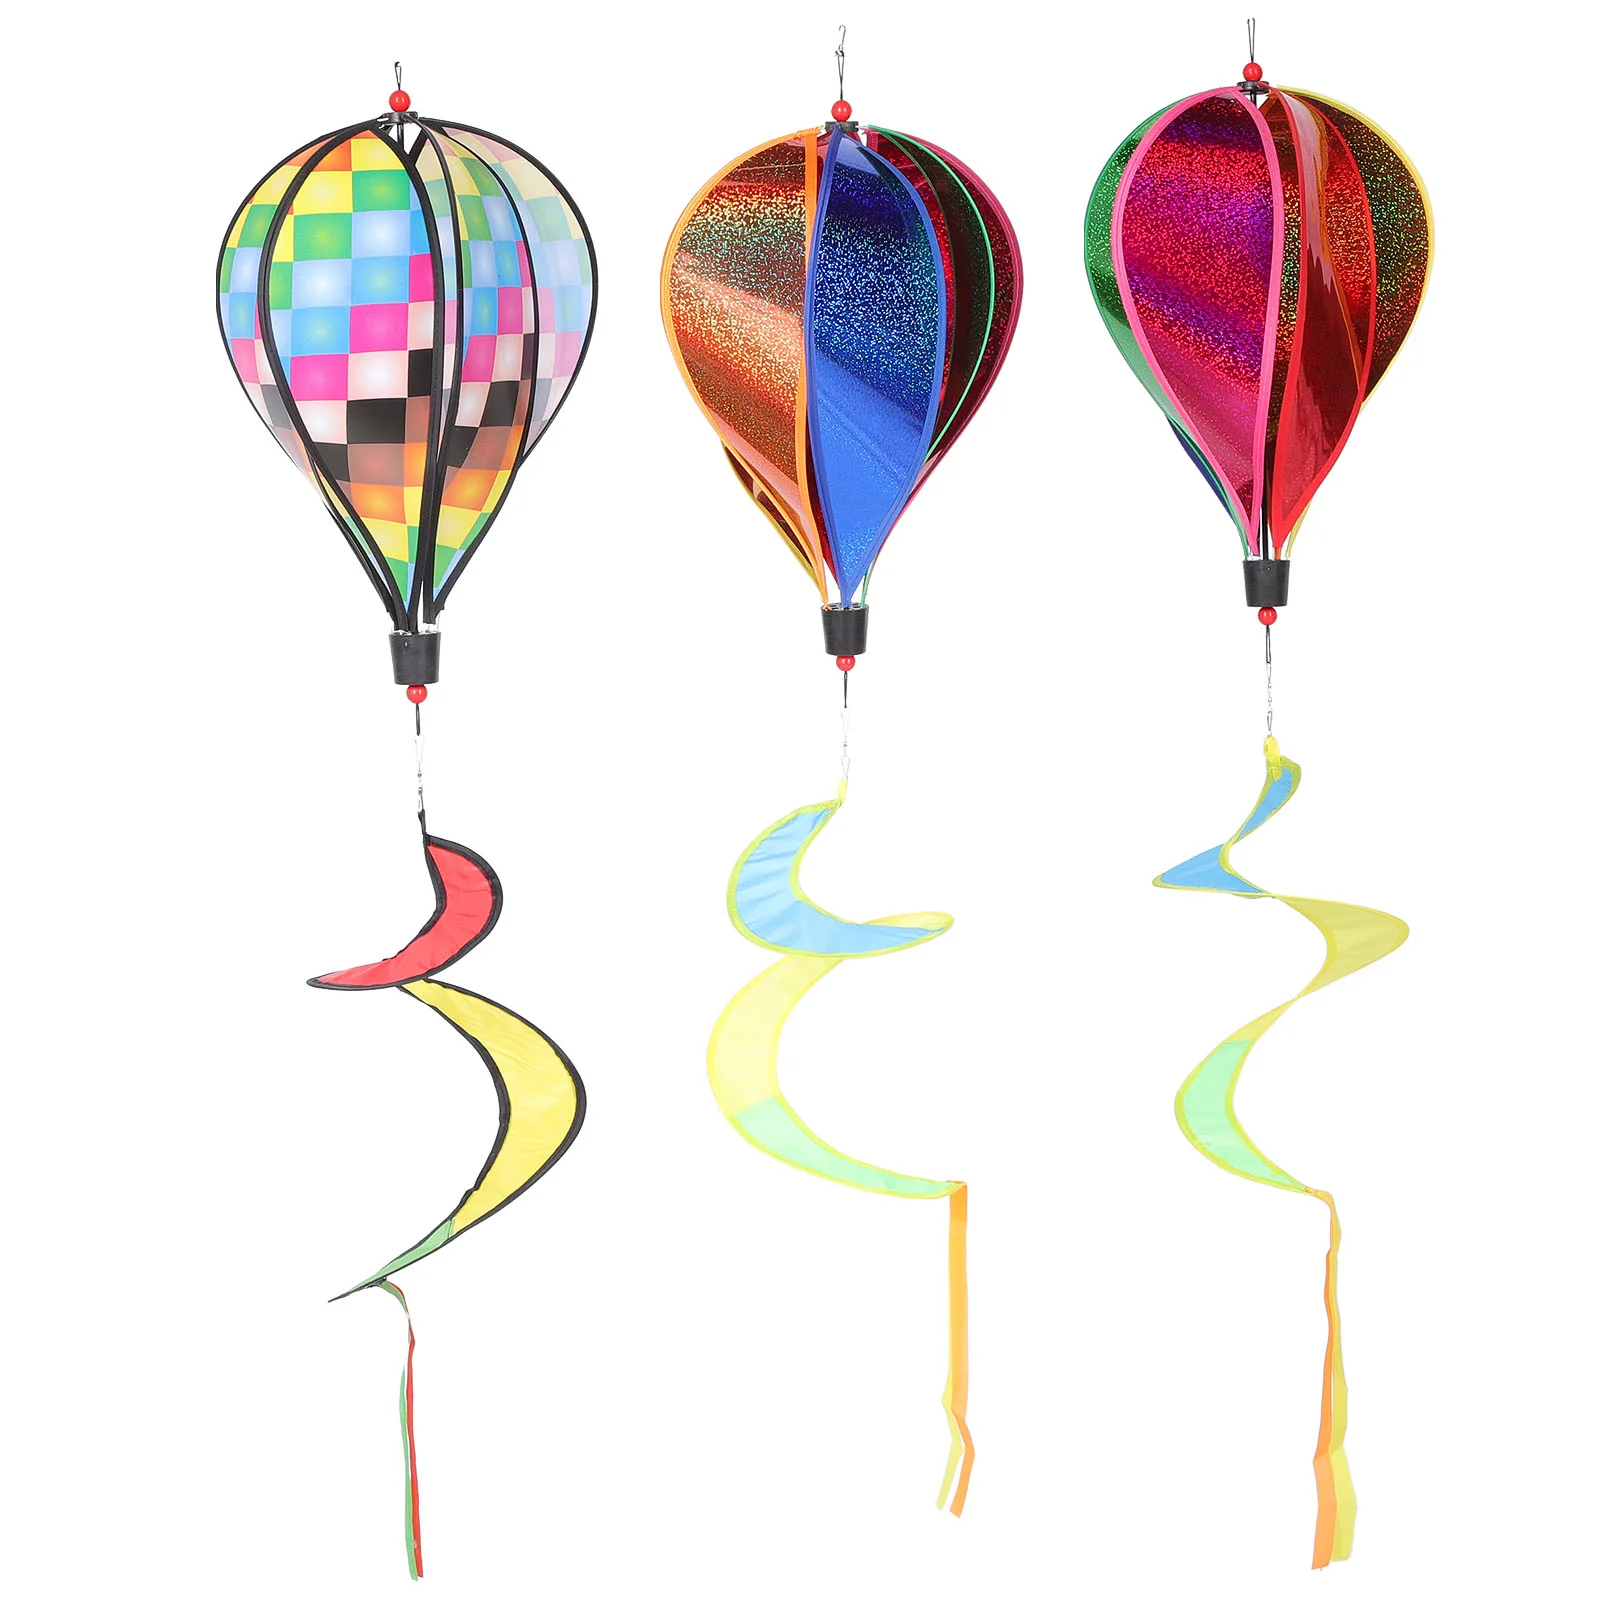 

3 Pcs Rainbow Pinwheel Outdoor Decor Cloth Wind Spinners Windmill Layout Balloon Windsock Party Decoration Hot Air Balloons